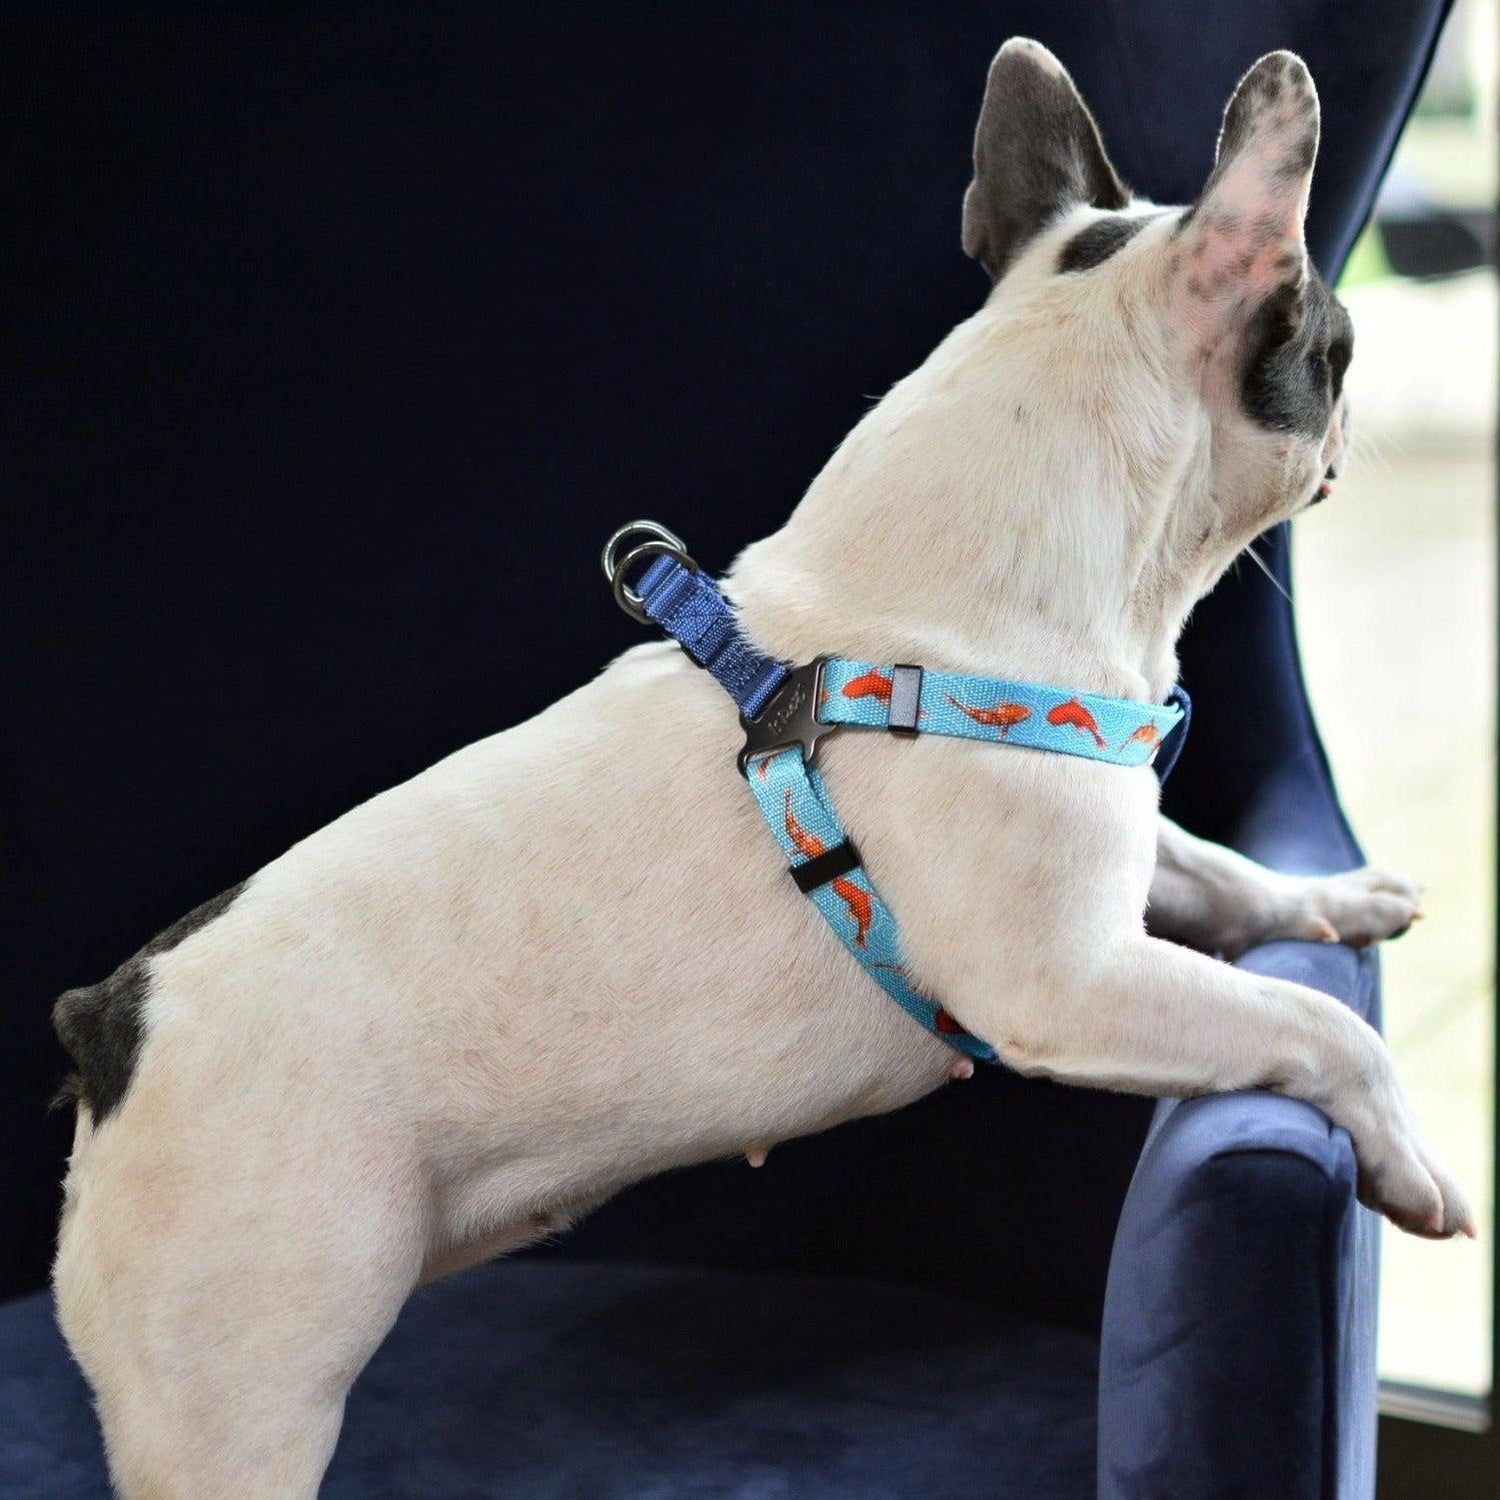 Bond For Love Dog Strap Harness - Fishes